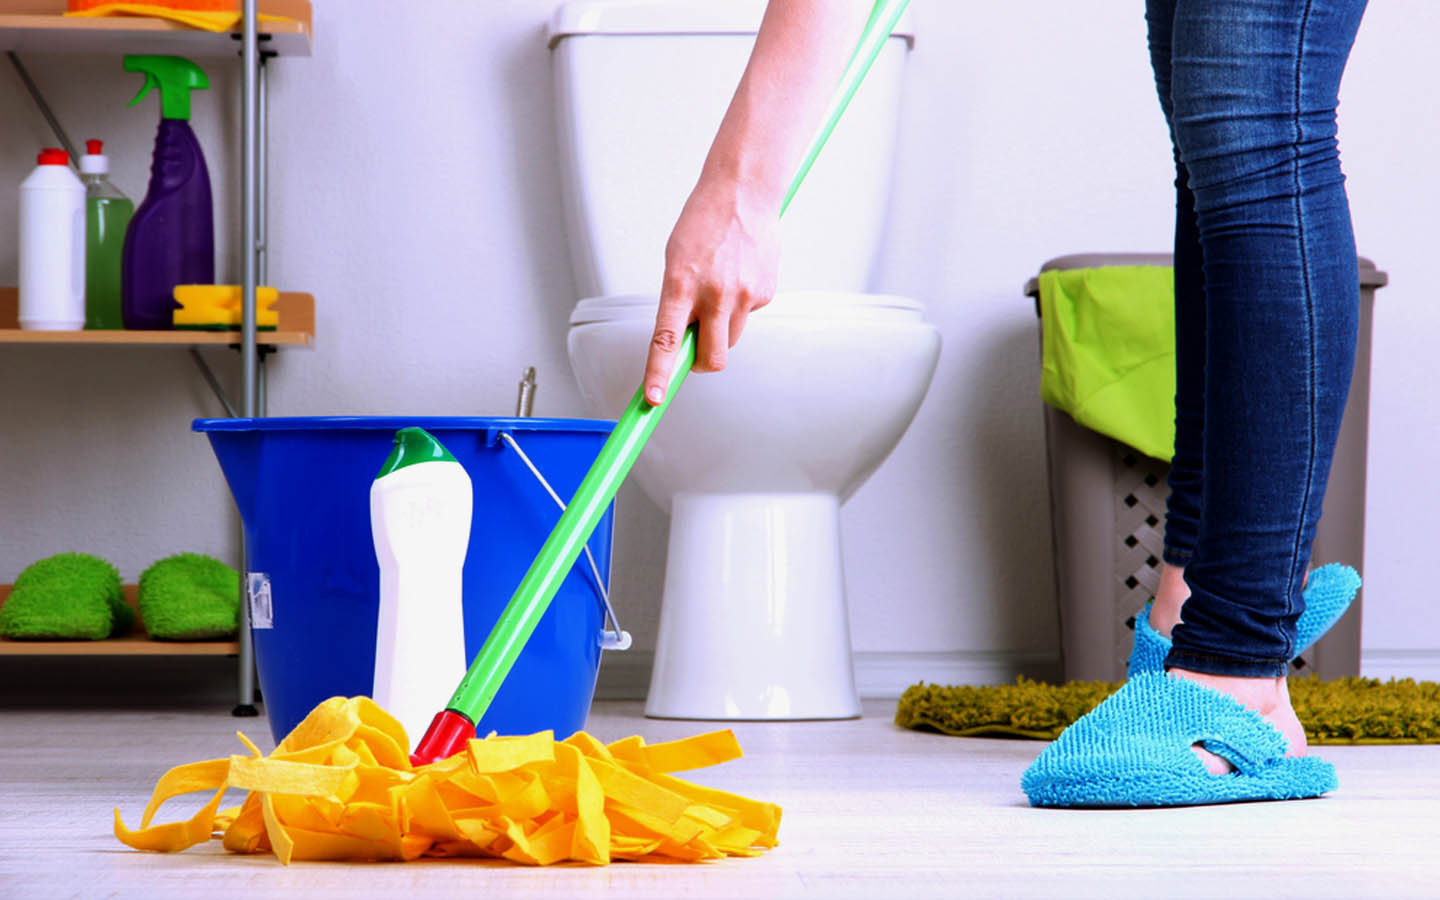 professional bathroom cleaners at xtreme cleaner